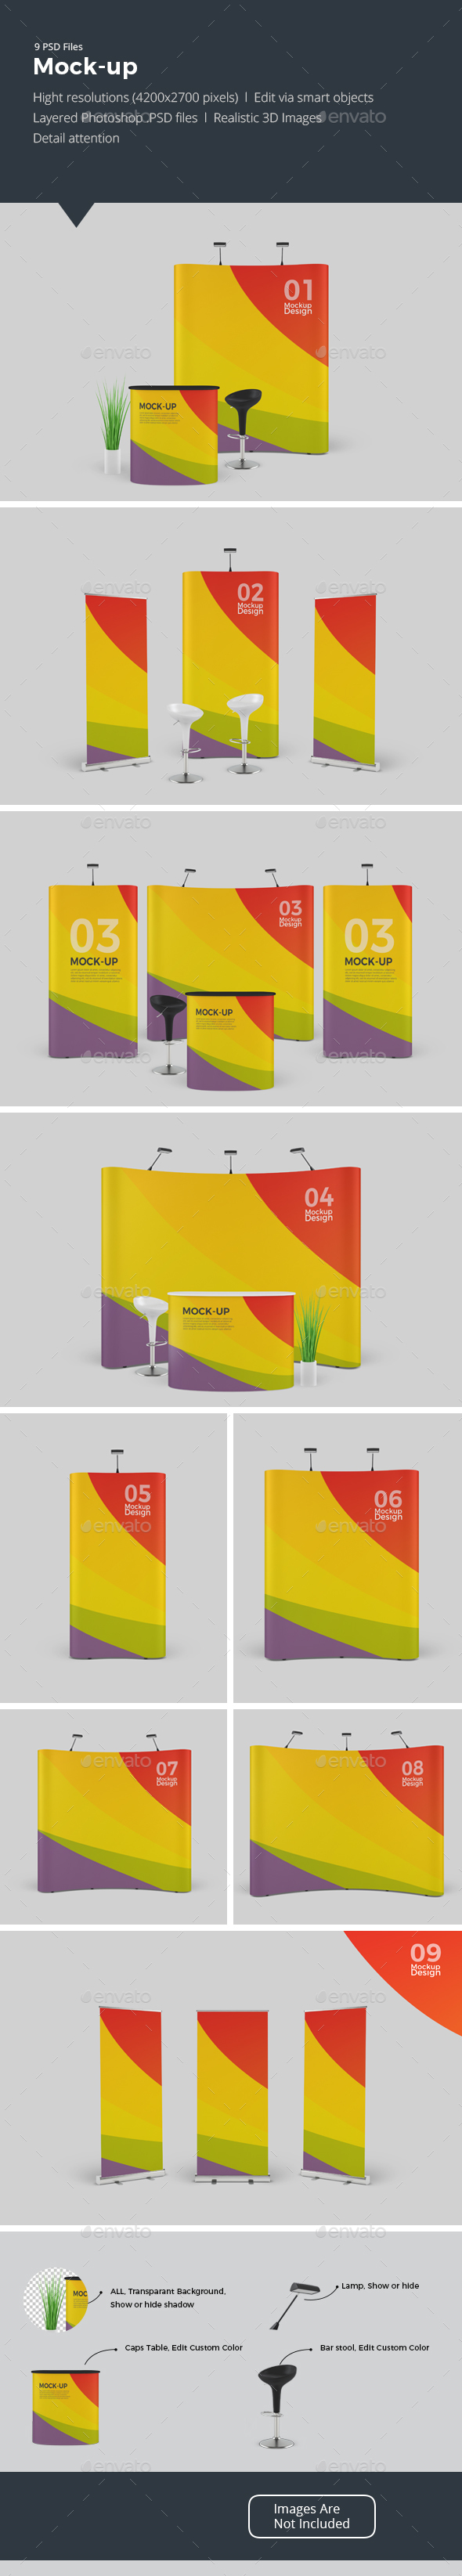 Download Event Stand / Trade Show Booth Mockup by docqueen ...